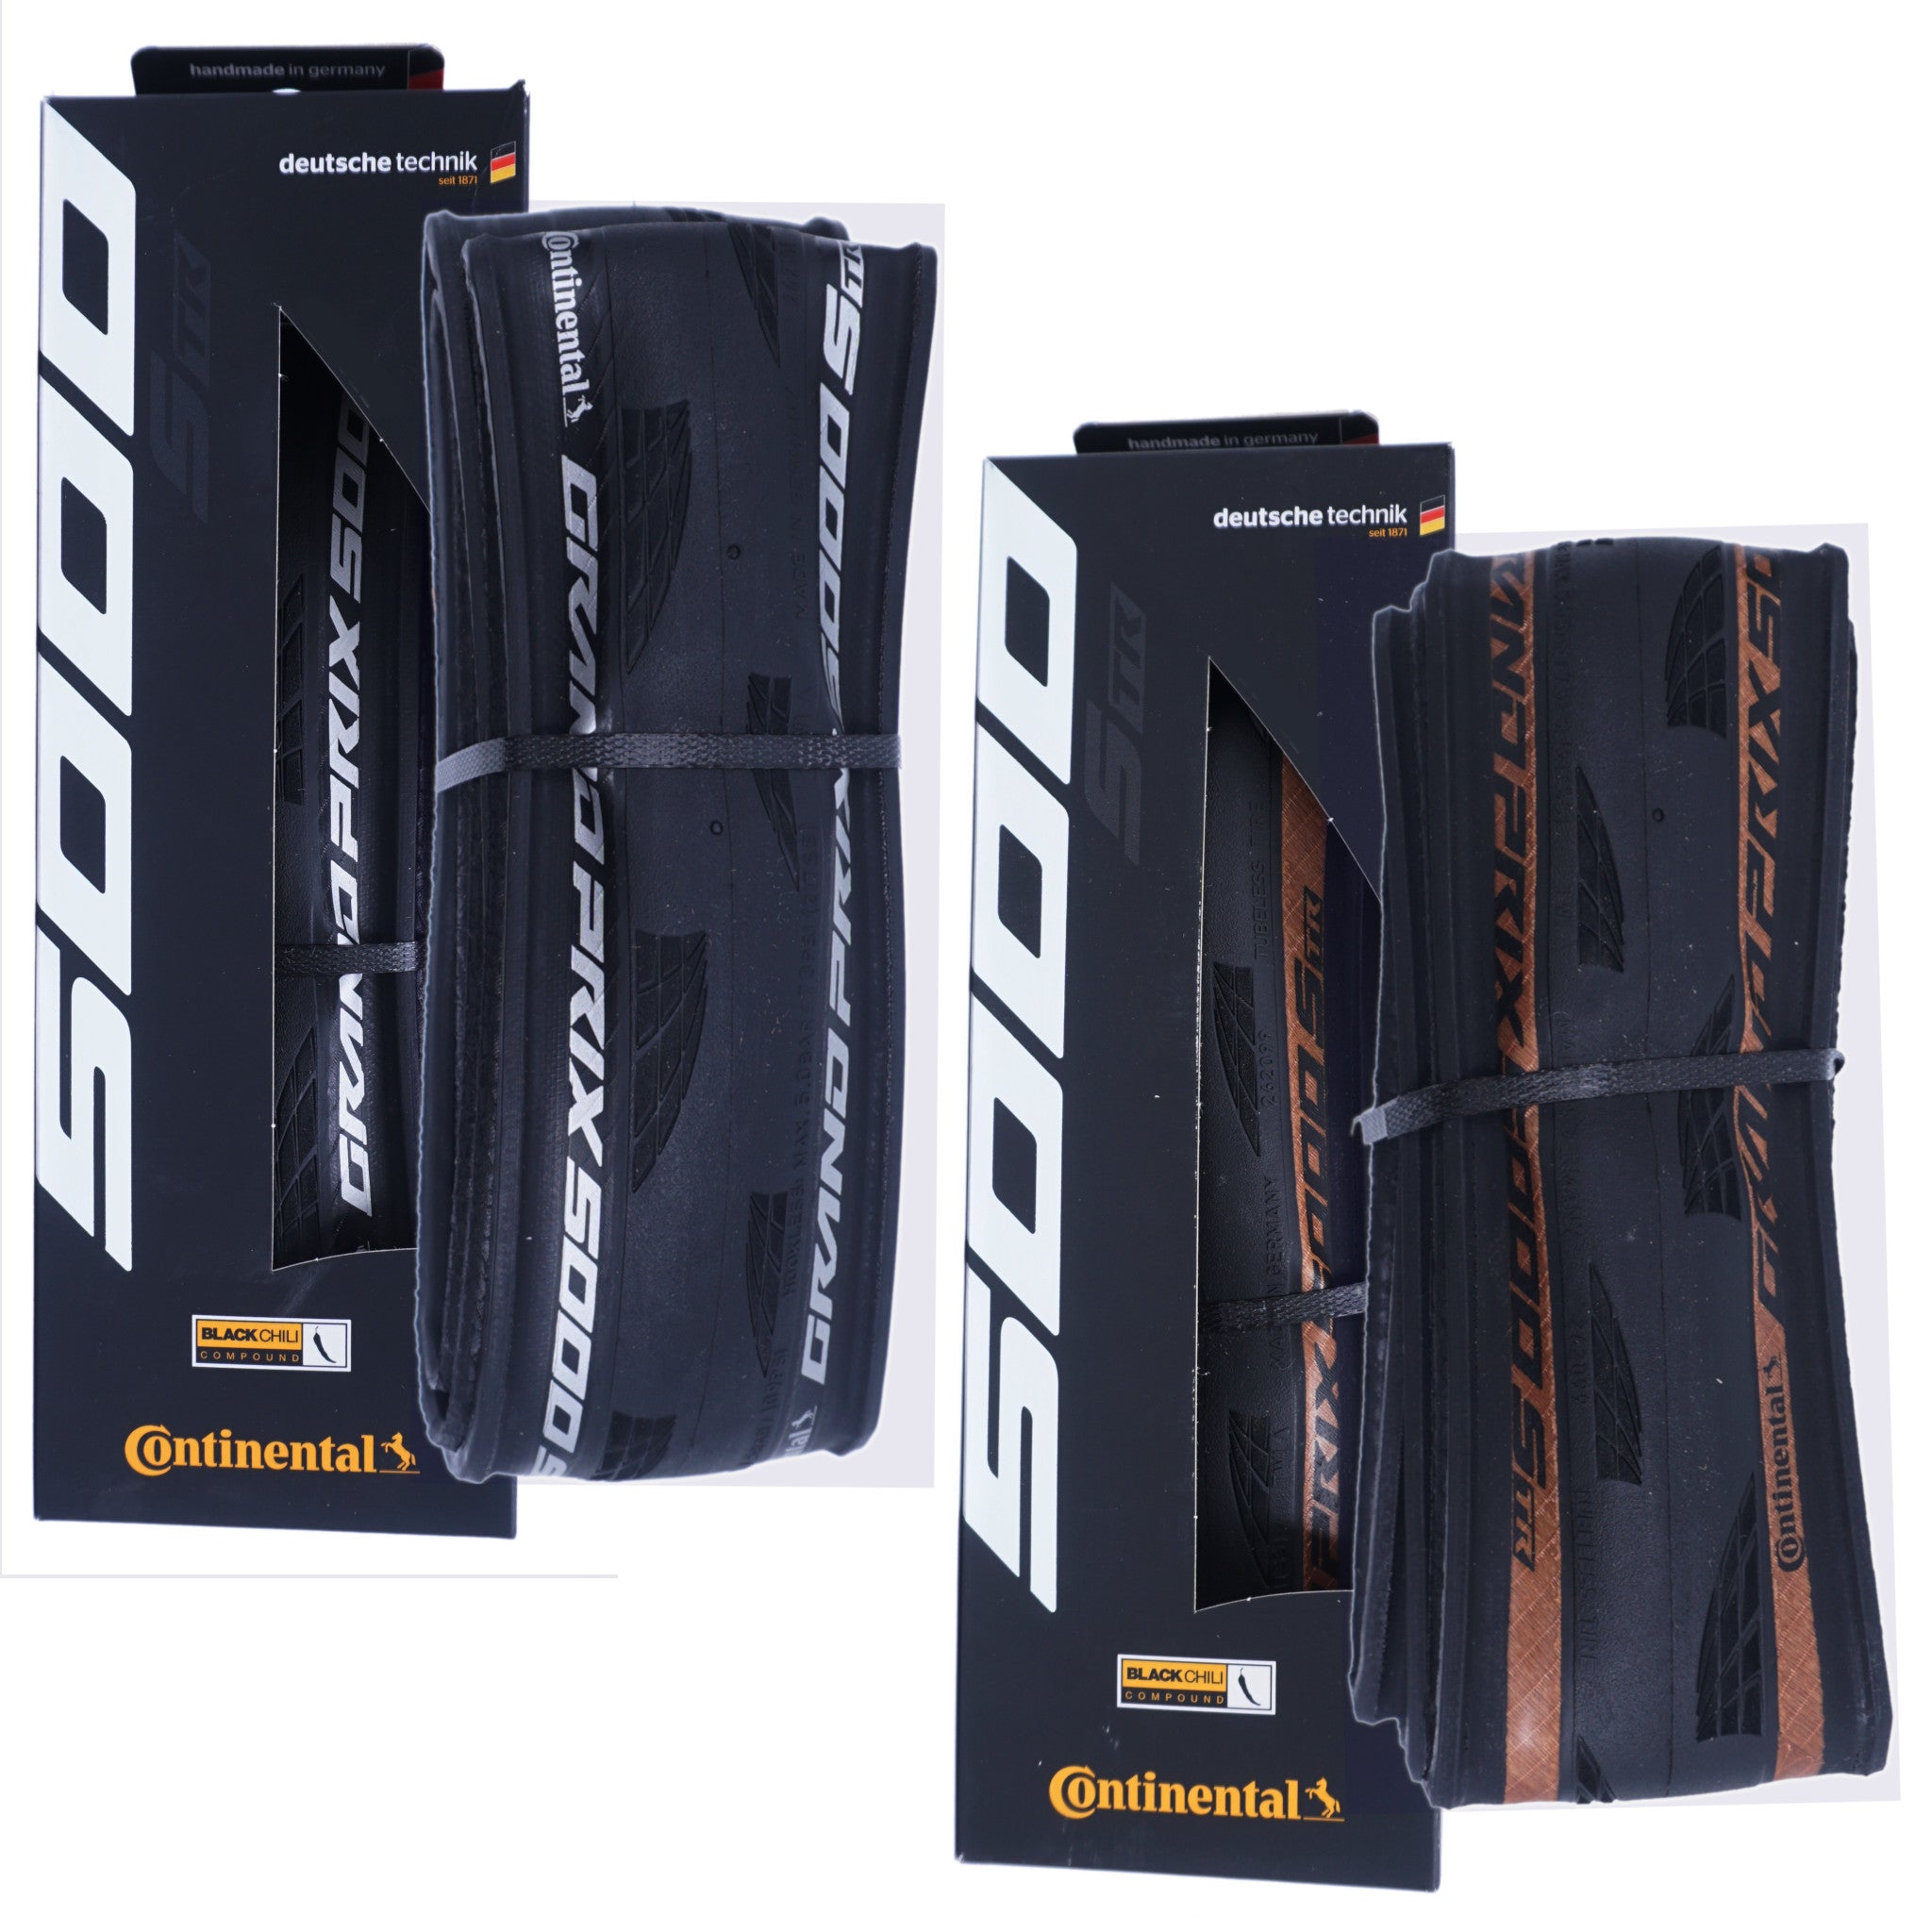 Continental Grand Prix 5000 S TR Tubeless Ready 700c Tire - The Bikesmiths